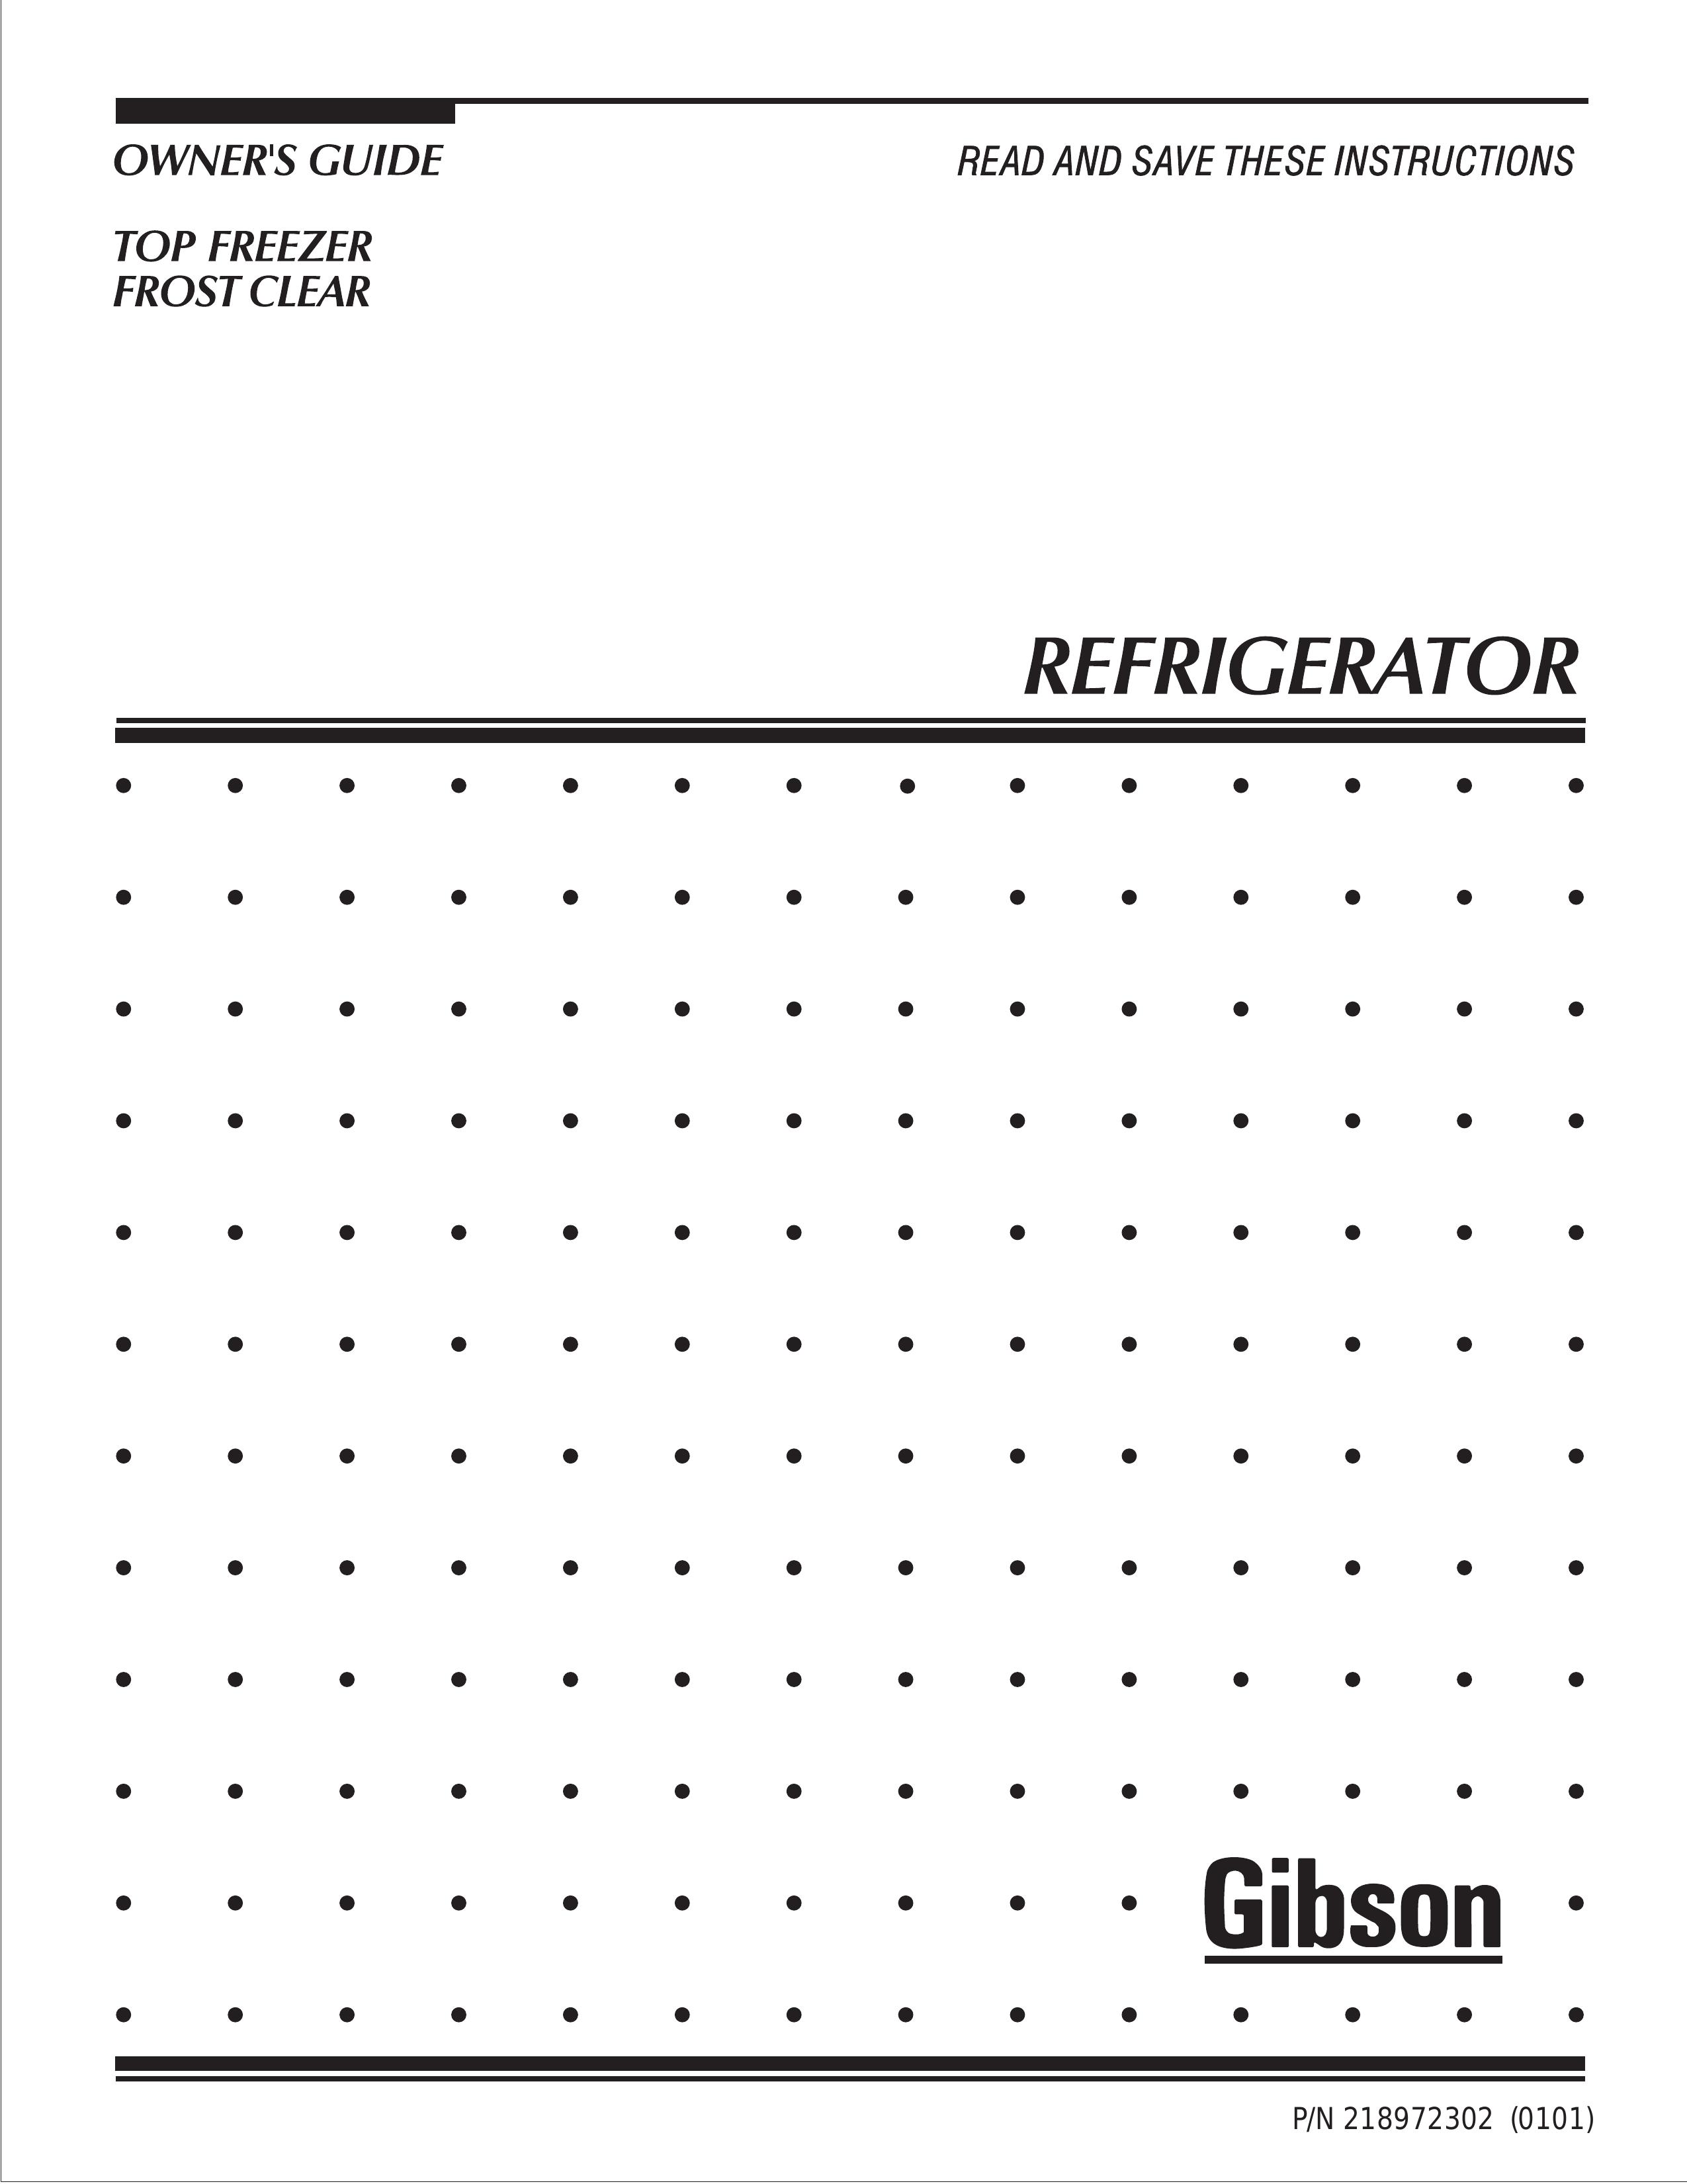 Electrolux - Gibson Top Freezer Frost Clear Refrigerator Refrigerator User Manual